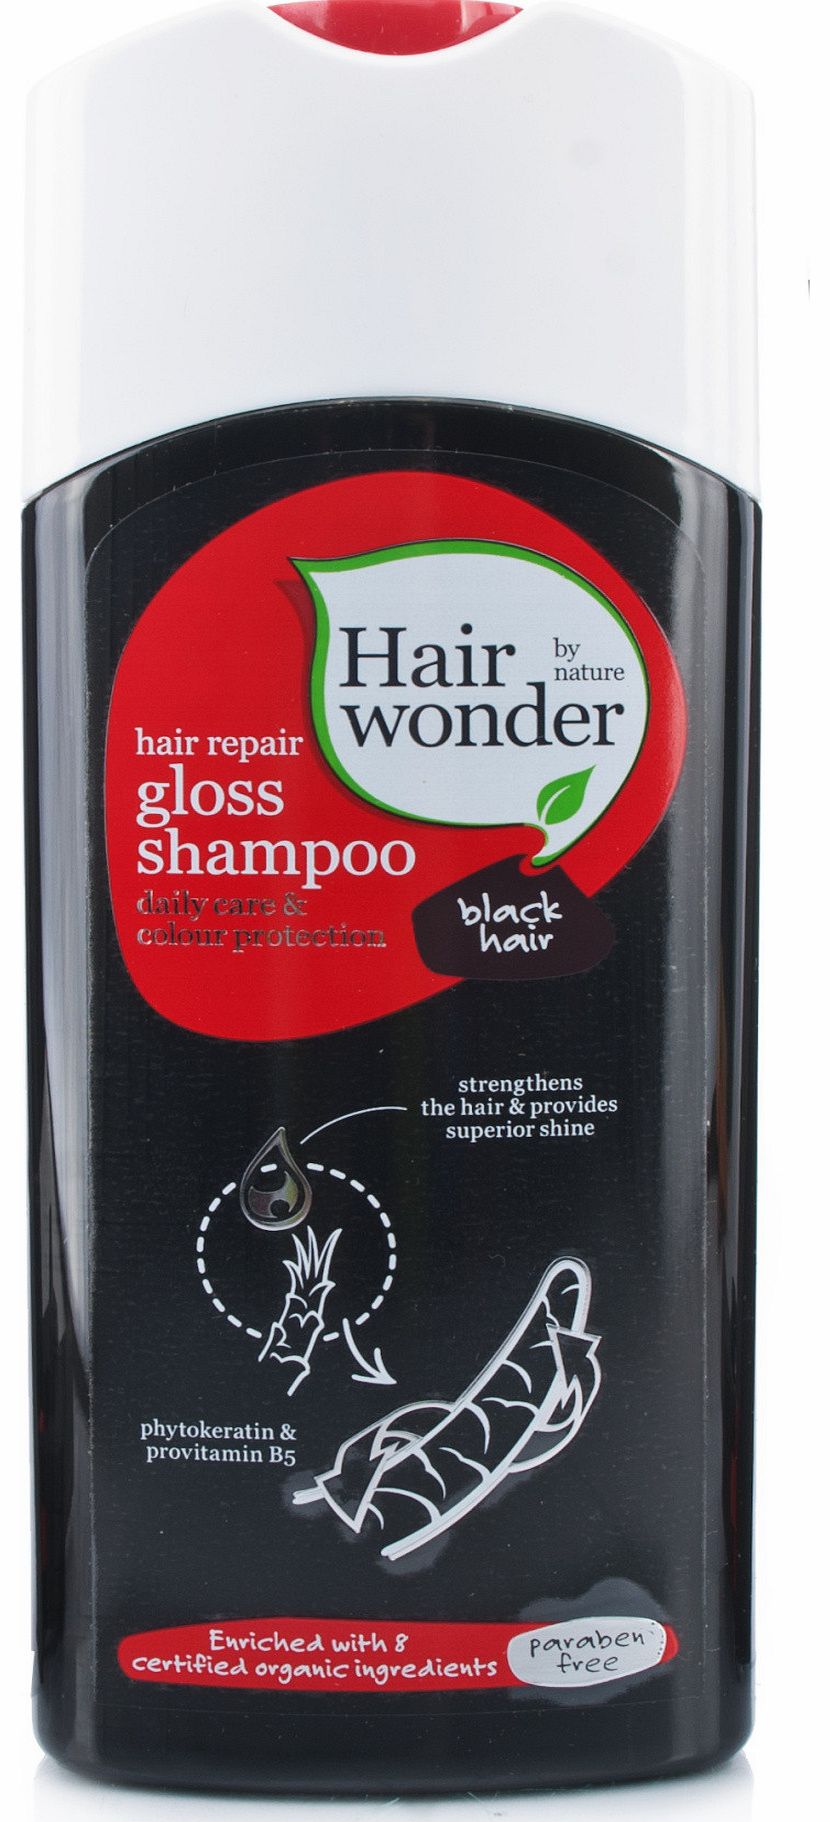 Hair Wonder Gloss Shampoo Black Hairhas been specially developed to protect and care for black hair. This is a mild cleansing shampoo which strengthens, conditions and hydrates hair. Enriched with 8 certified organic ingredients providing long term c